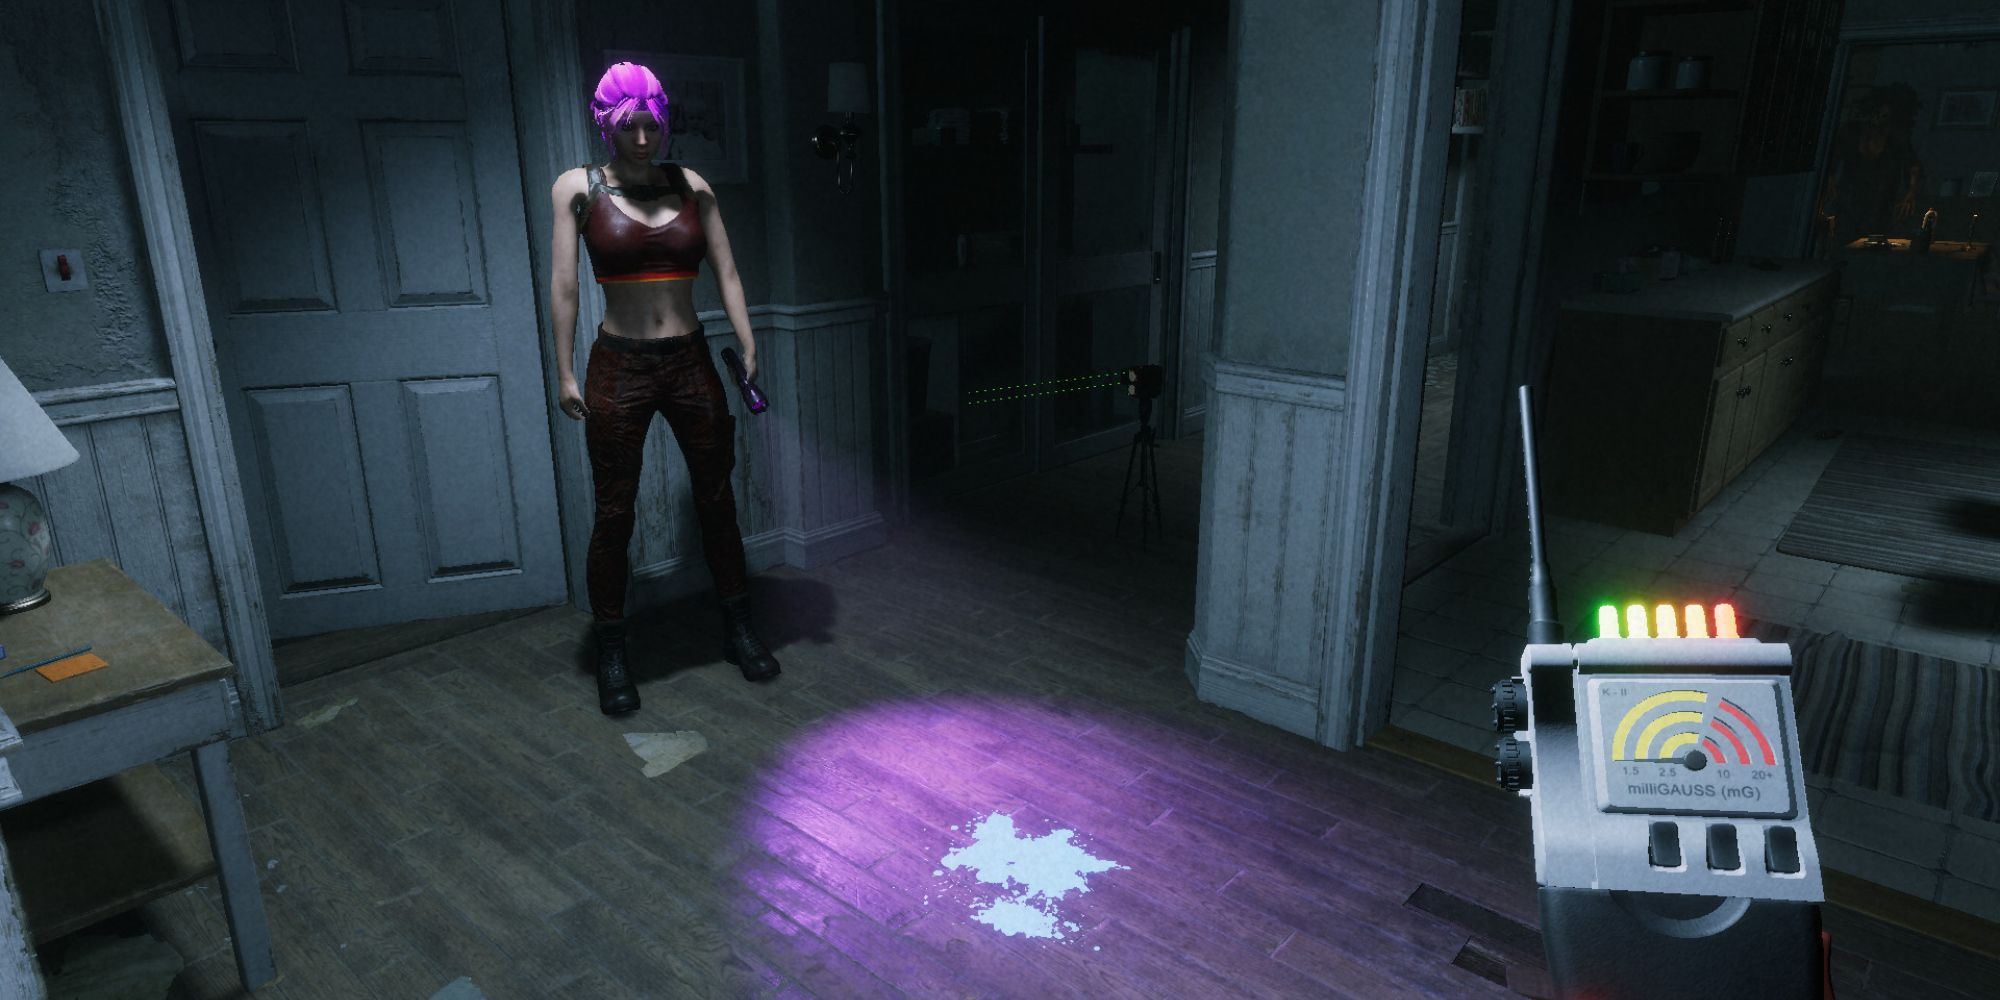 ghost watchers player pointing uv light on ground and other player holding emf reader